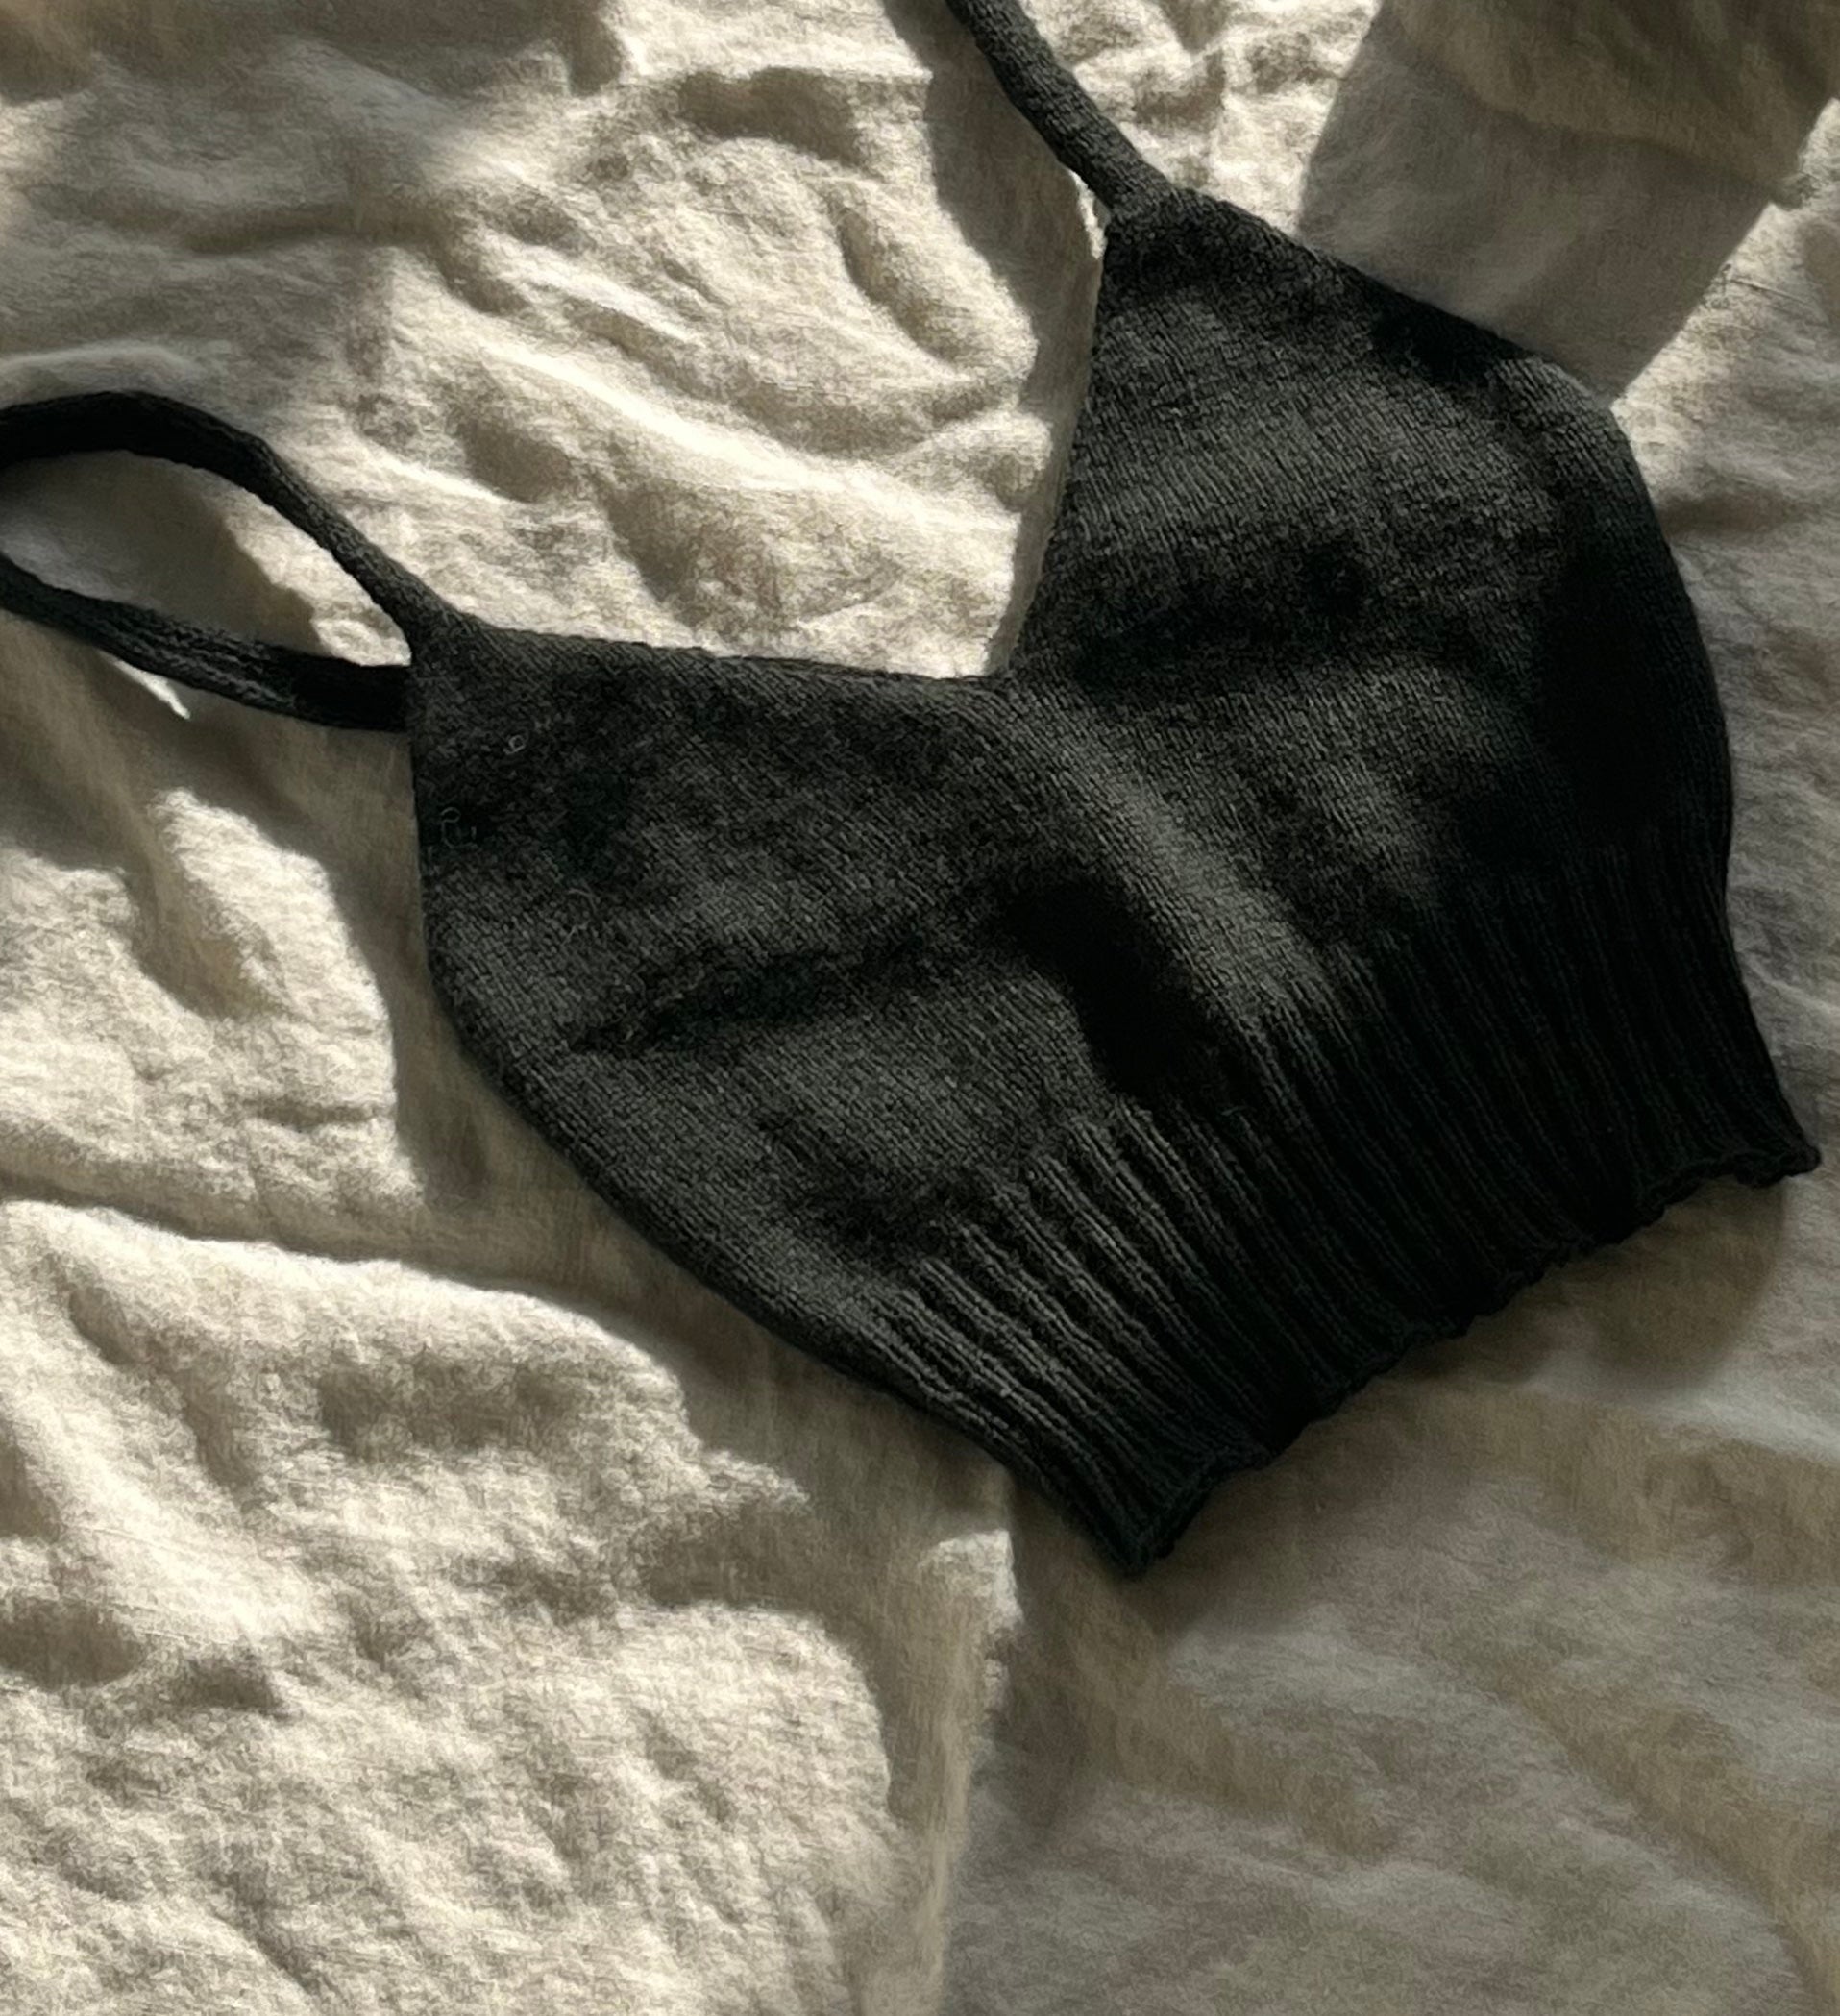 PURL PAL: The Simple Bralette – the thread